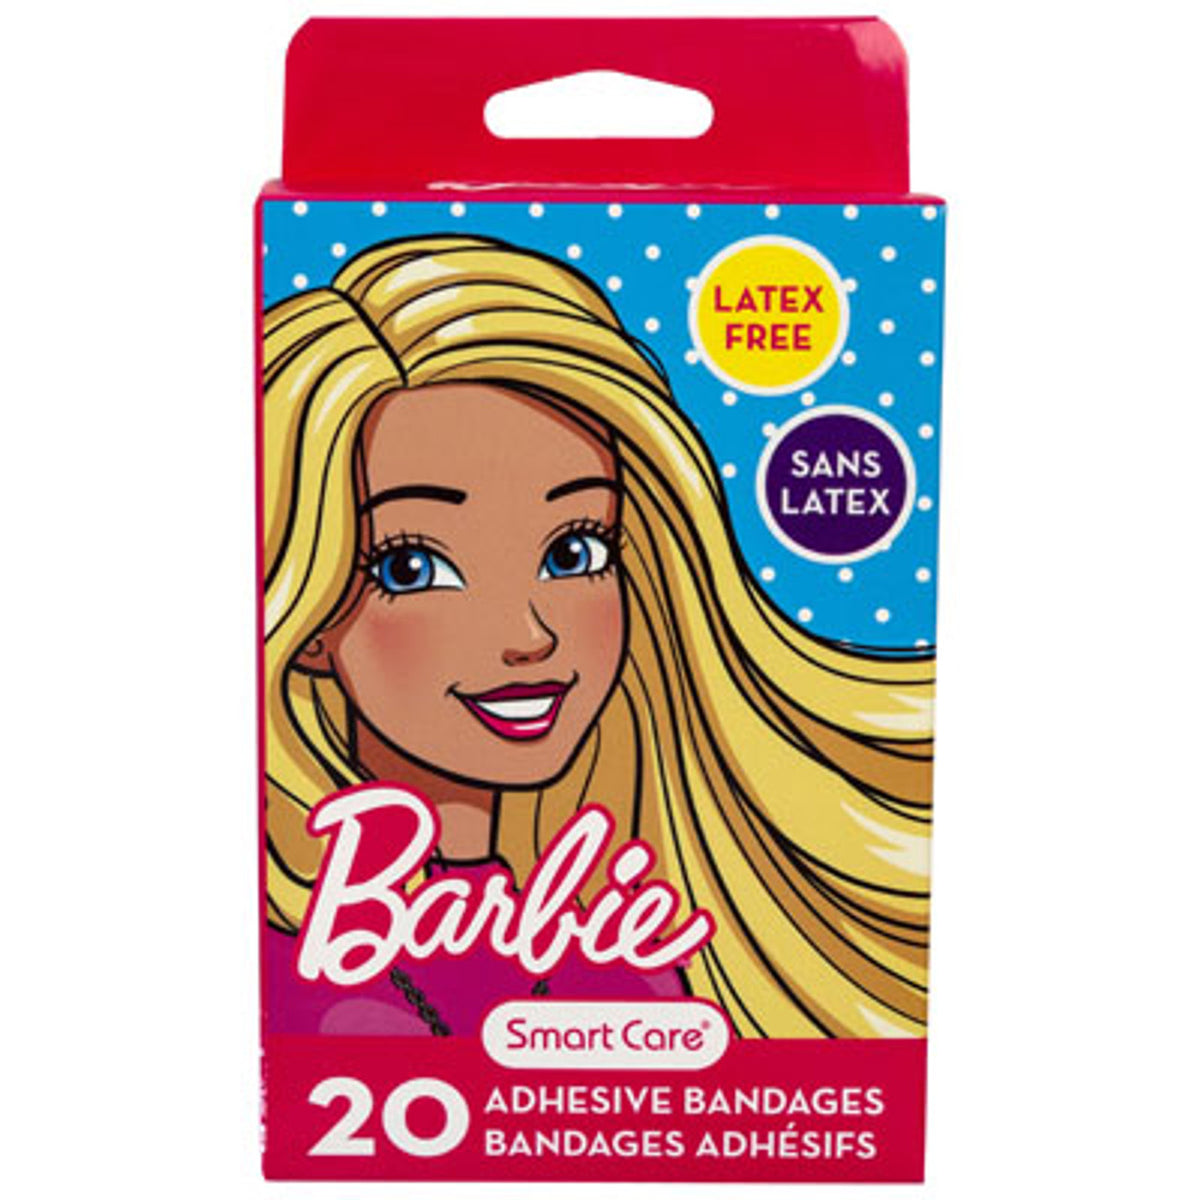 20 Kids Latex Free Adhesive Band-Aids - Hot Wheels & Barbie Bandages For Boo-Boo's